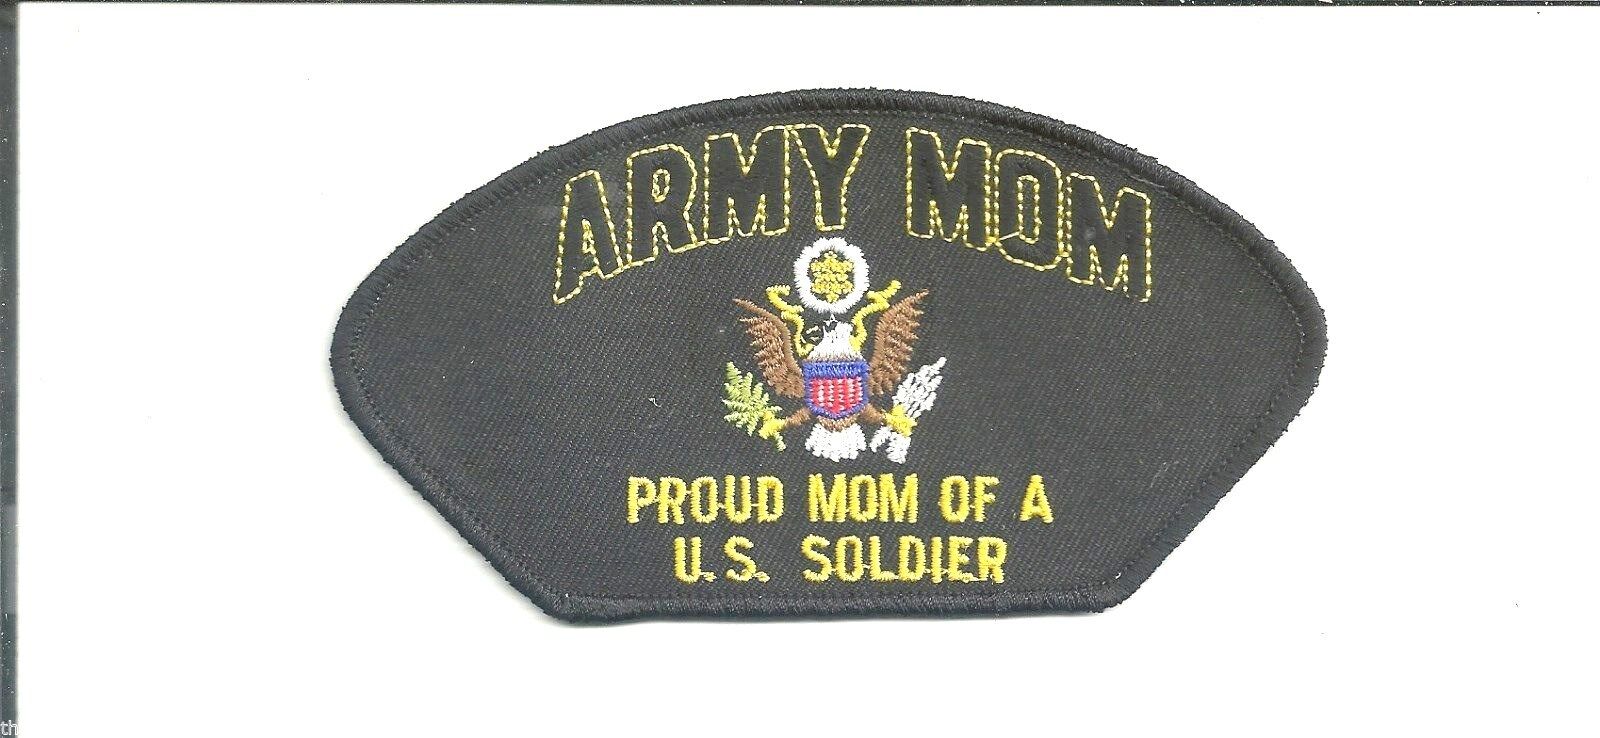 PROUD ARMY MOM OF A U.S. SOLDIER EMBROIDERED PATCH